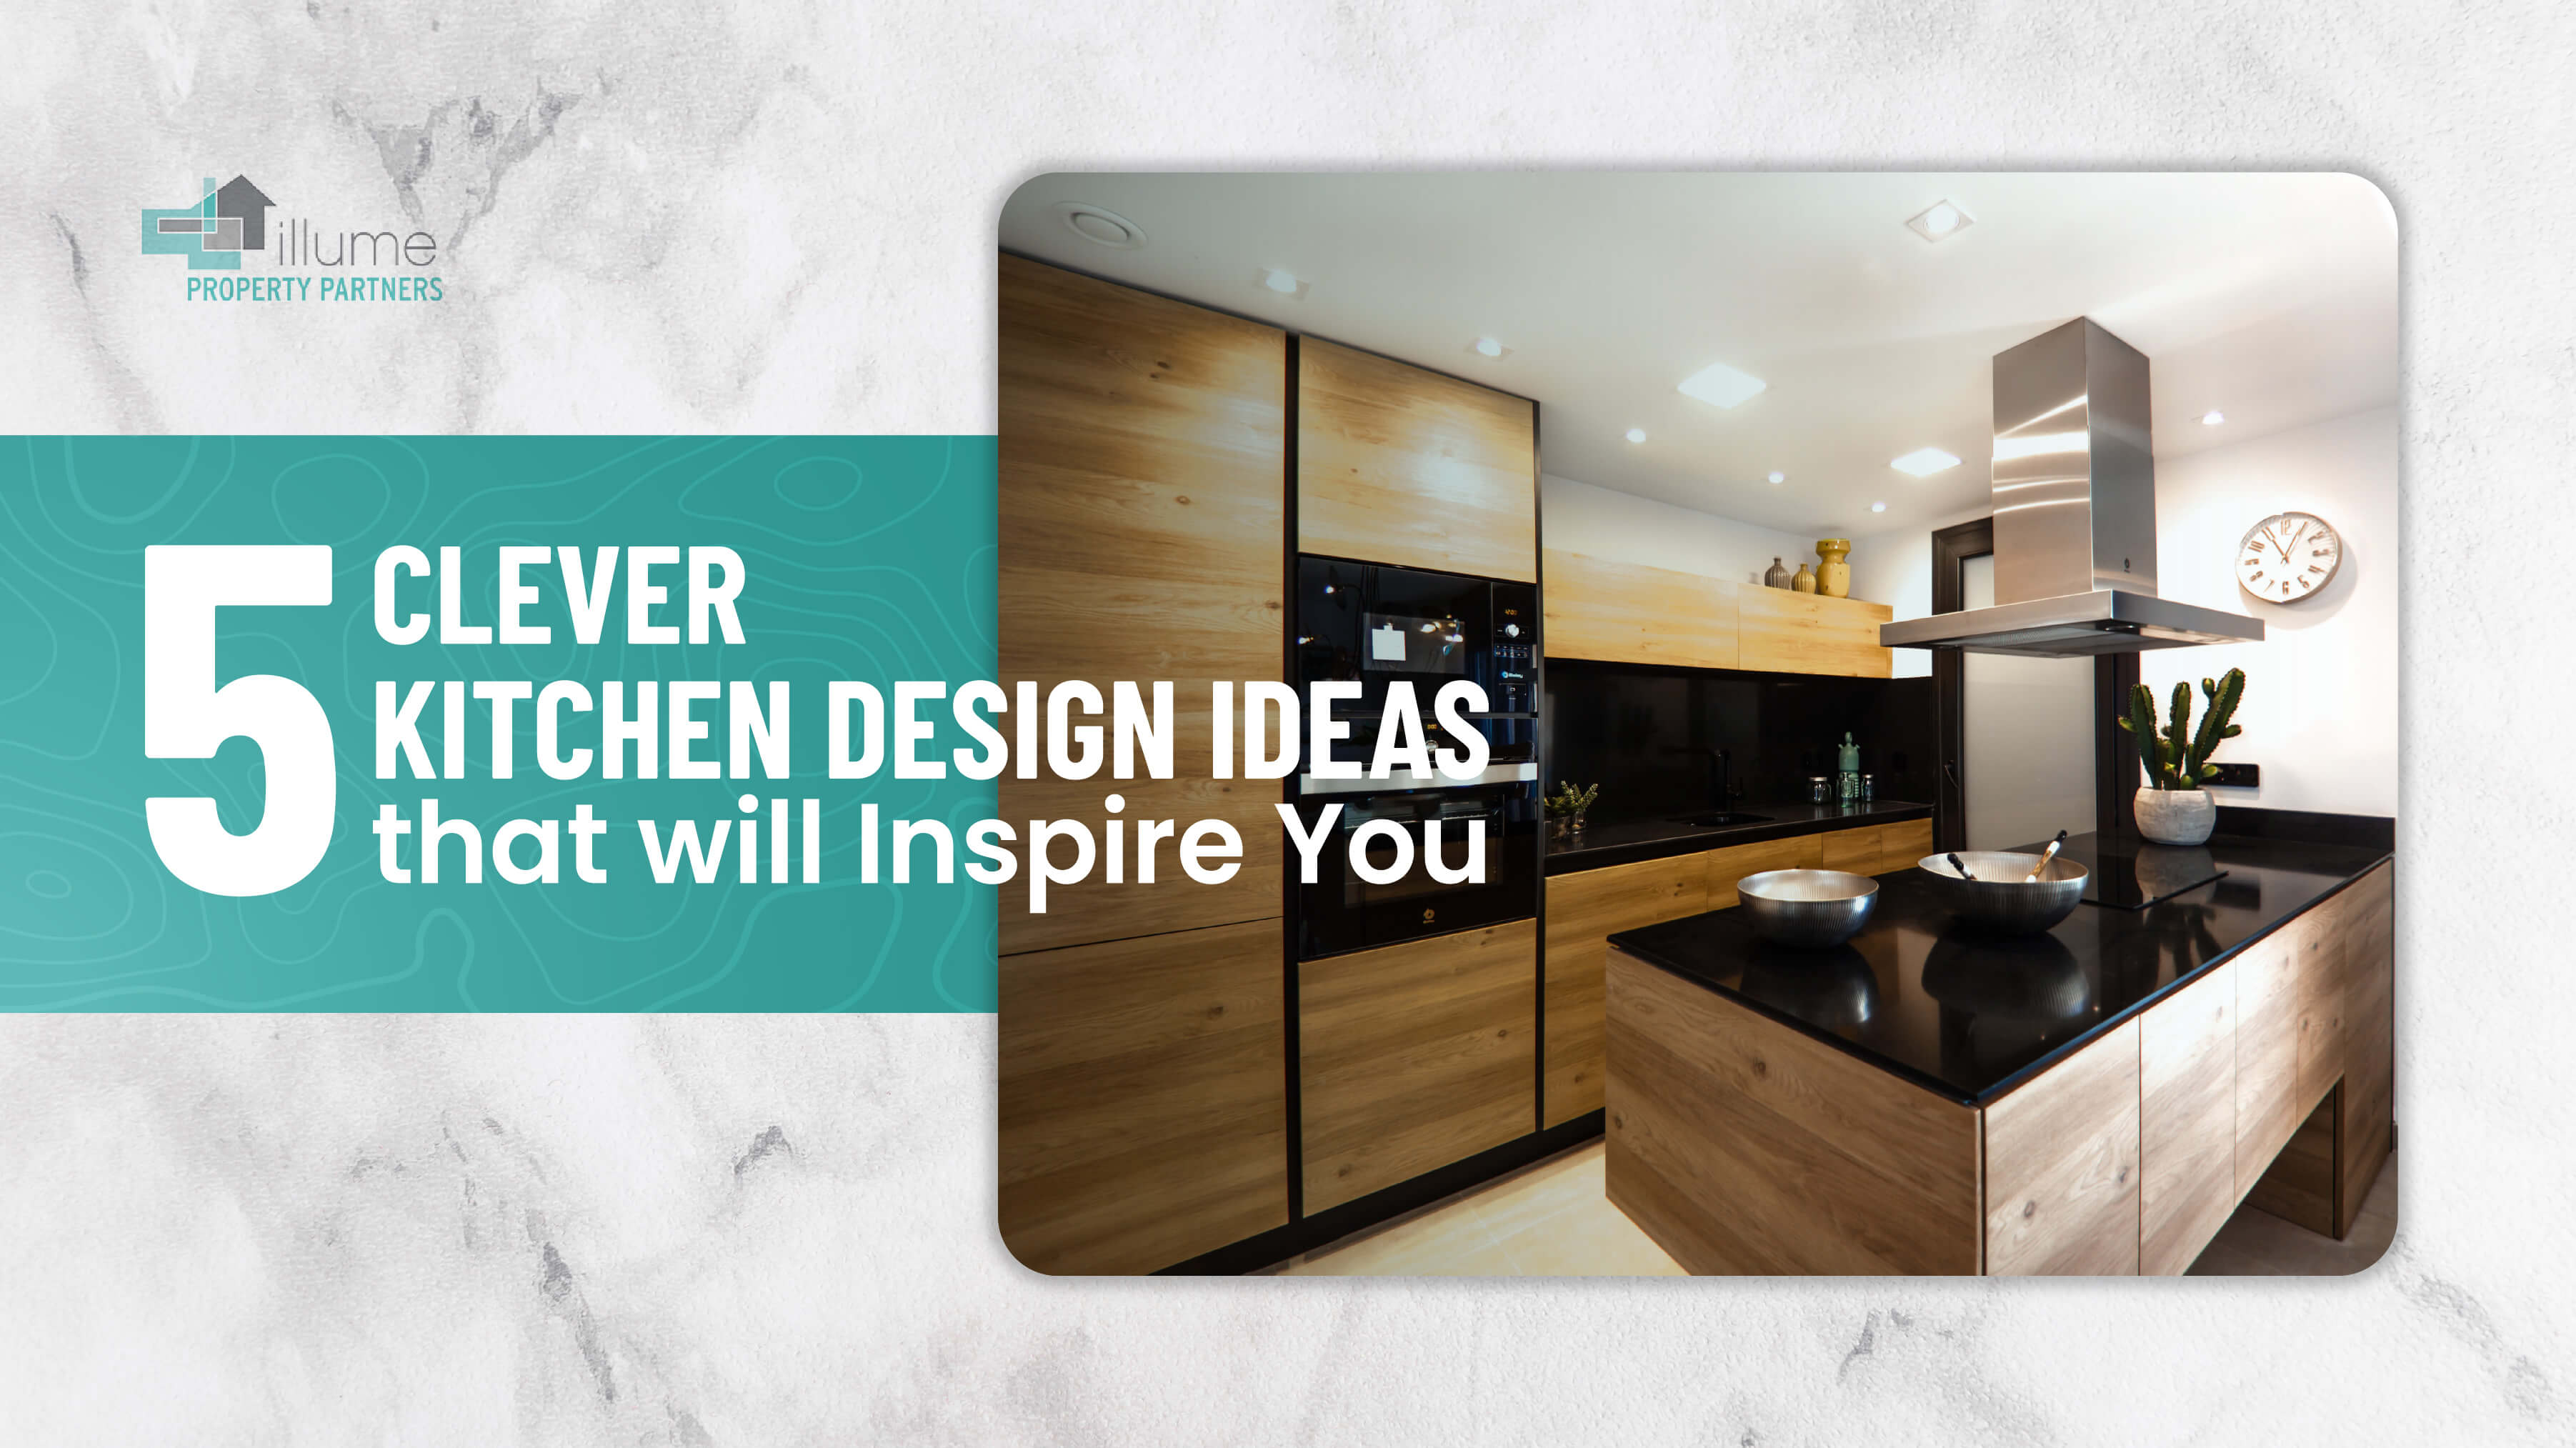 5 Clever Kitchen Design Ideas That Will Inspire You